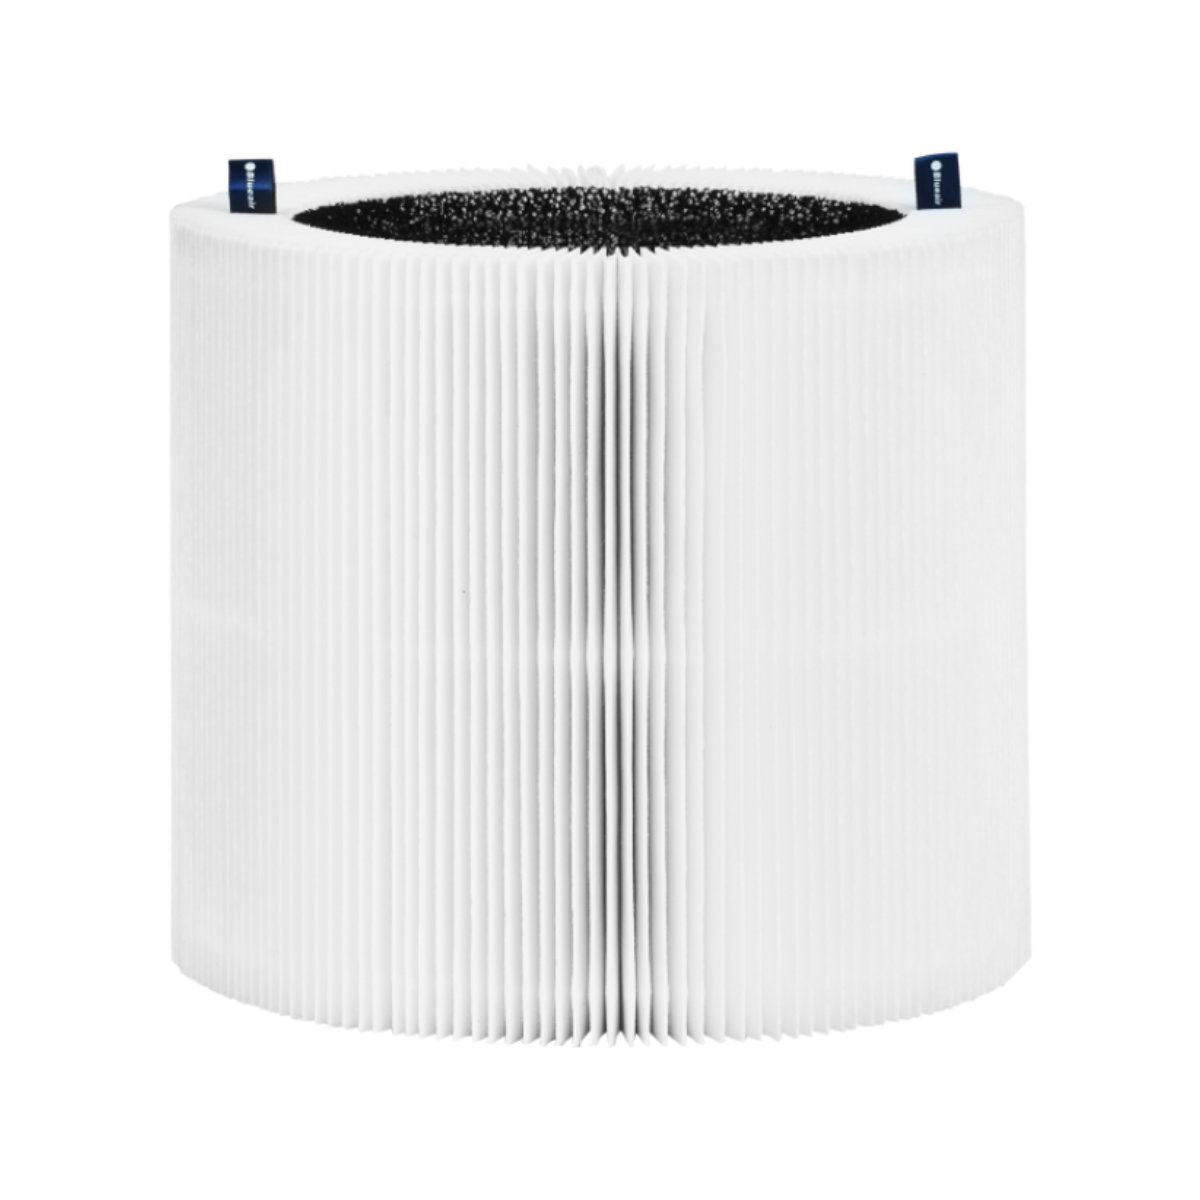 Blueair® Blue Pure Max Replacement Filters